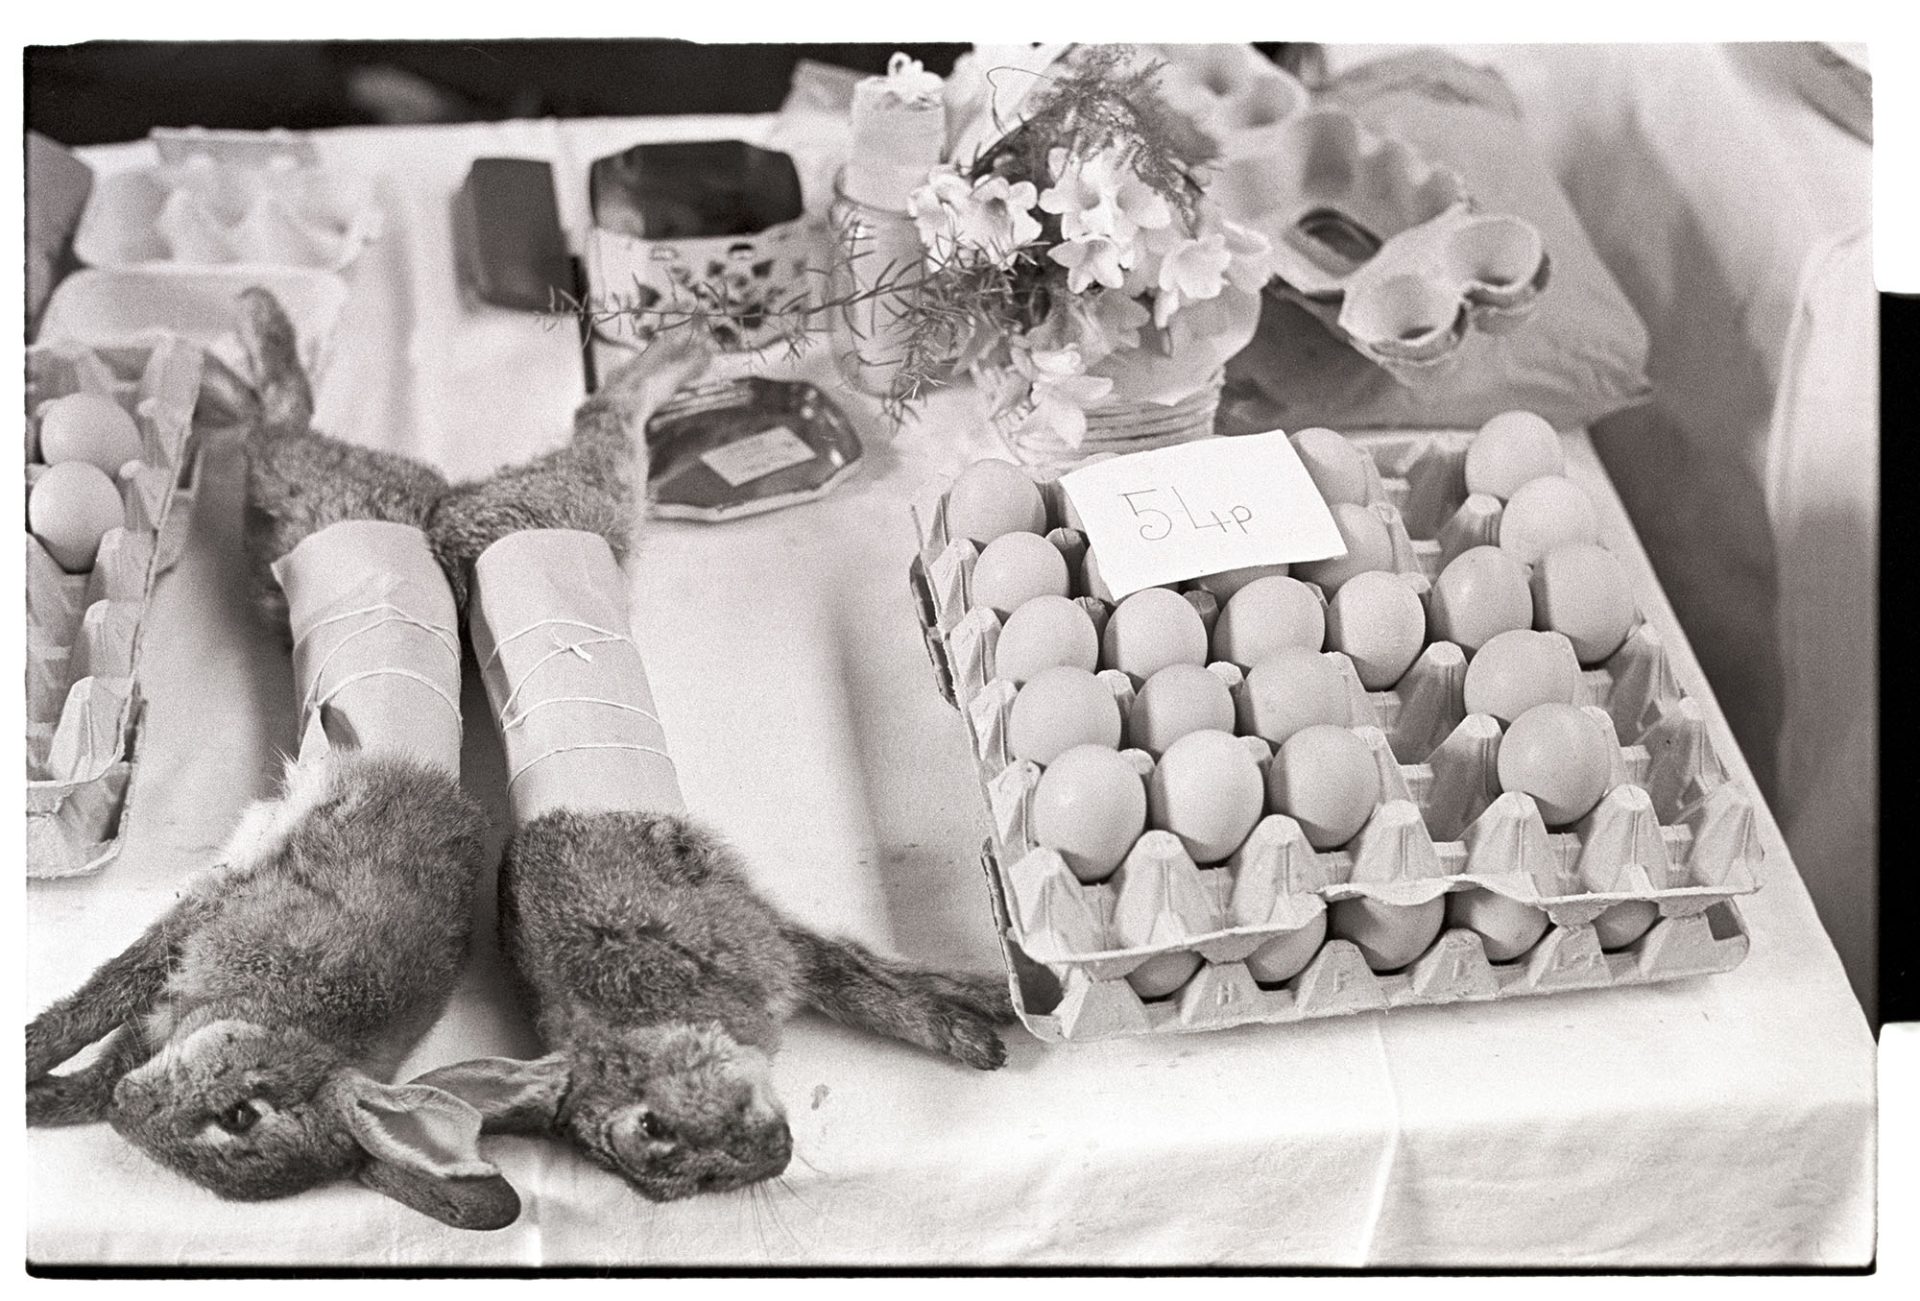 Eggs and rabbits on market stall.
[Eggs and rabbits for sale on a stall at Barnstaple Pannier Market.]